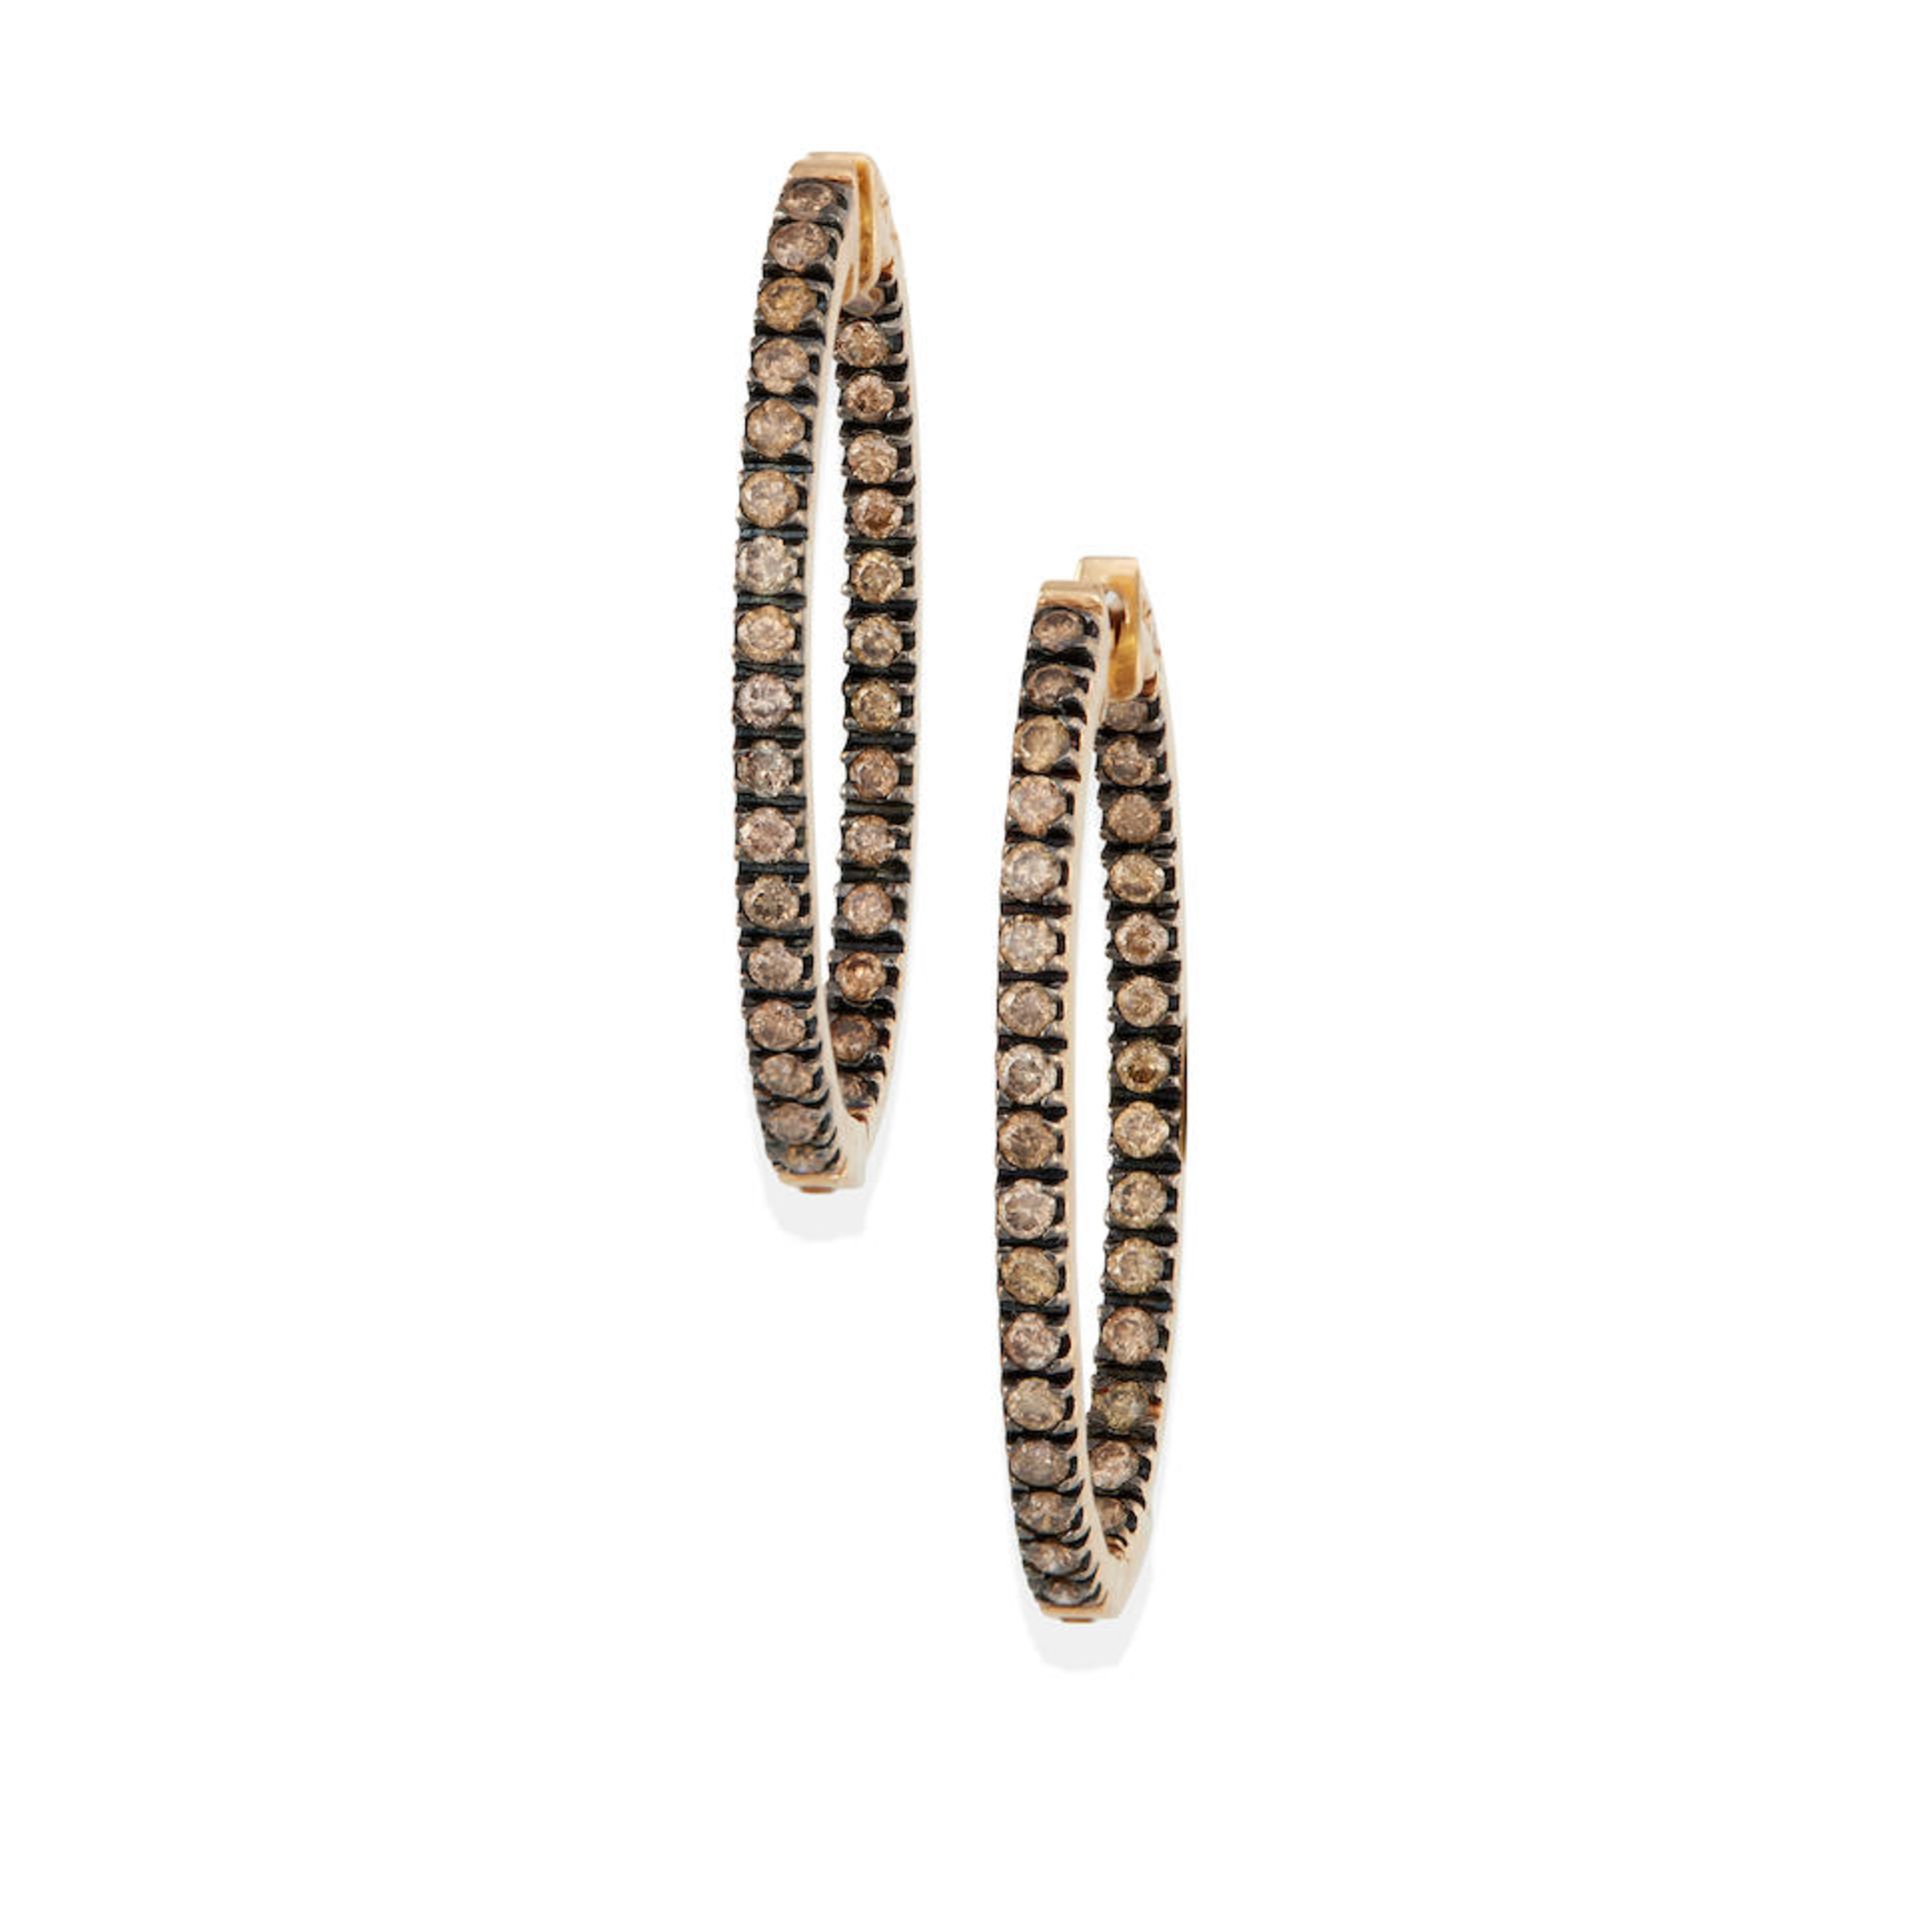 A PAIR OF 14K GOLD, AND COLORED DIAMOND HOOP EARRINGS